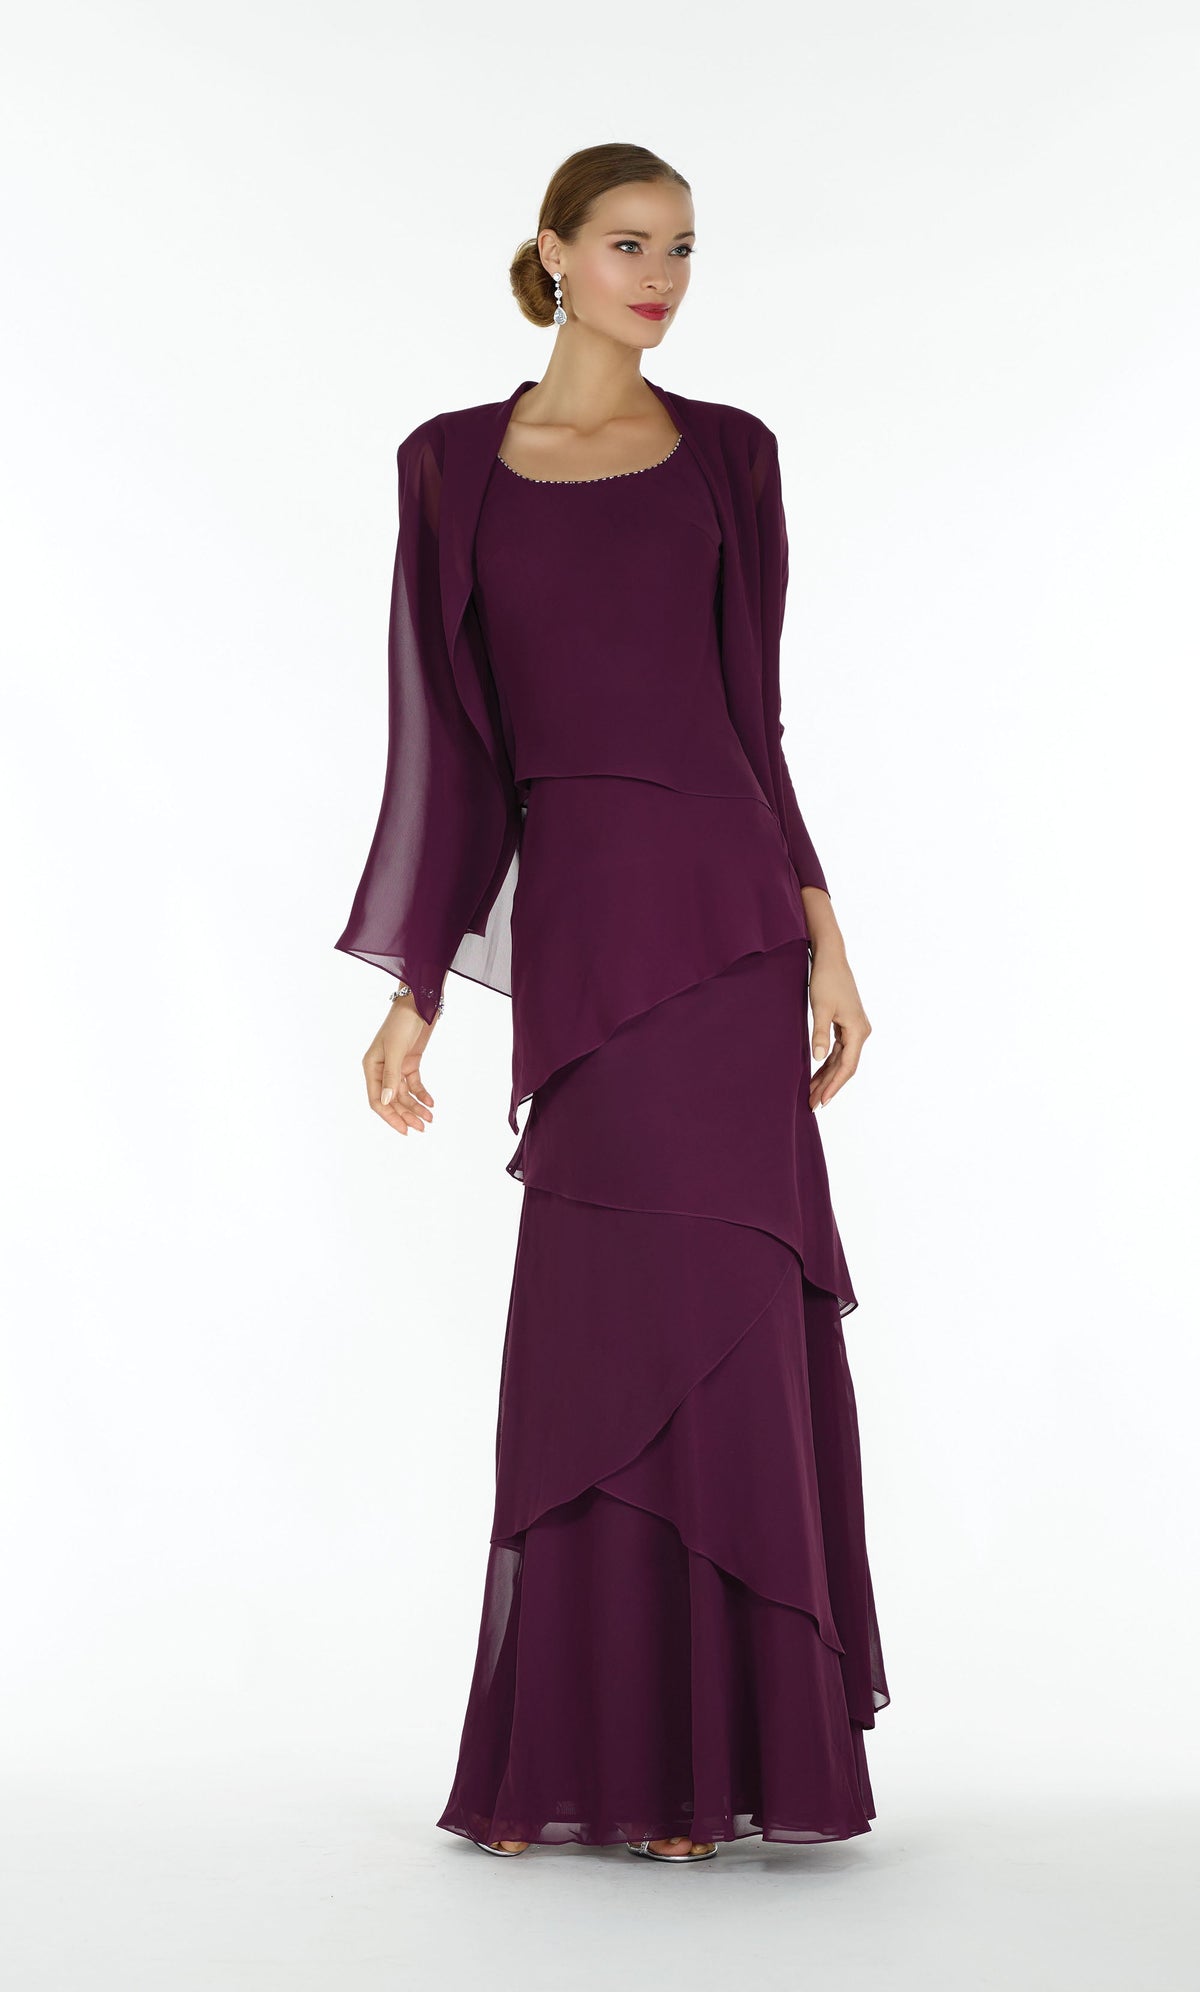 Long chiffon layered mother of the bride dress with  a bead accented scoop neckline  and matching chiffon jacket; in the color eggplant.